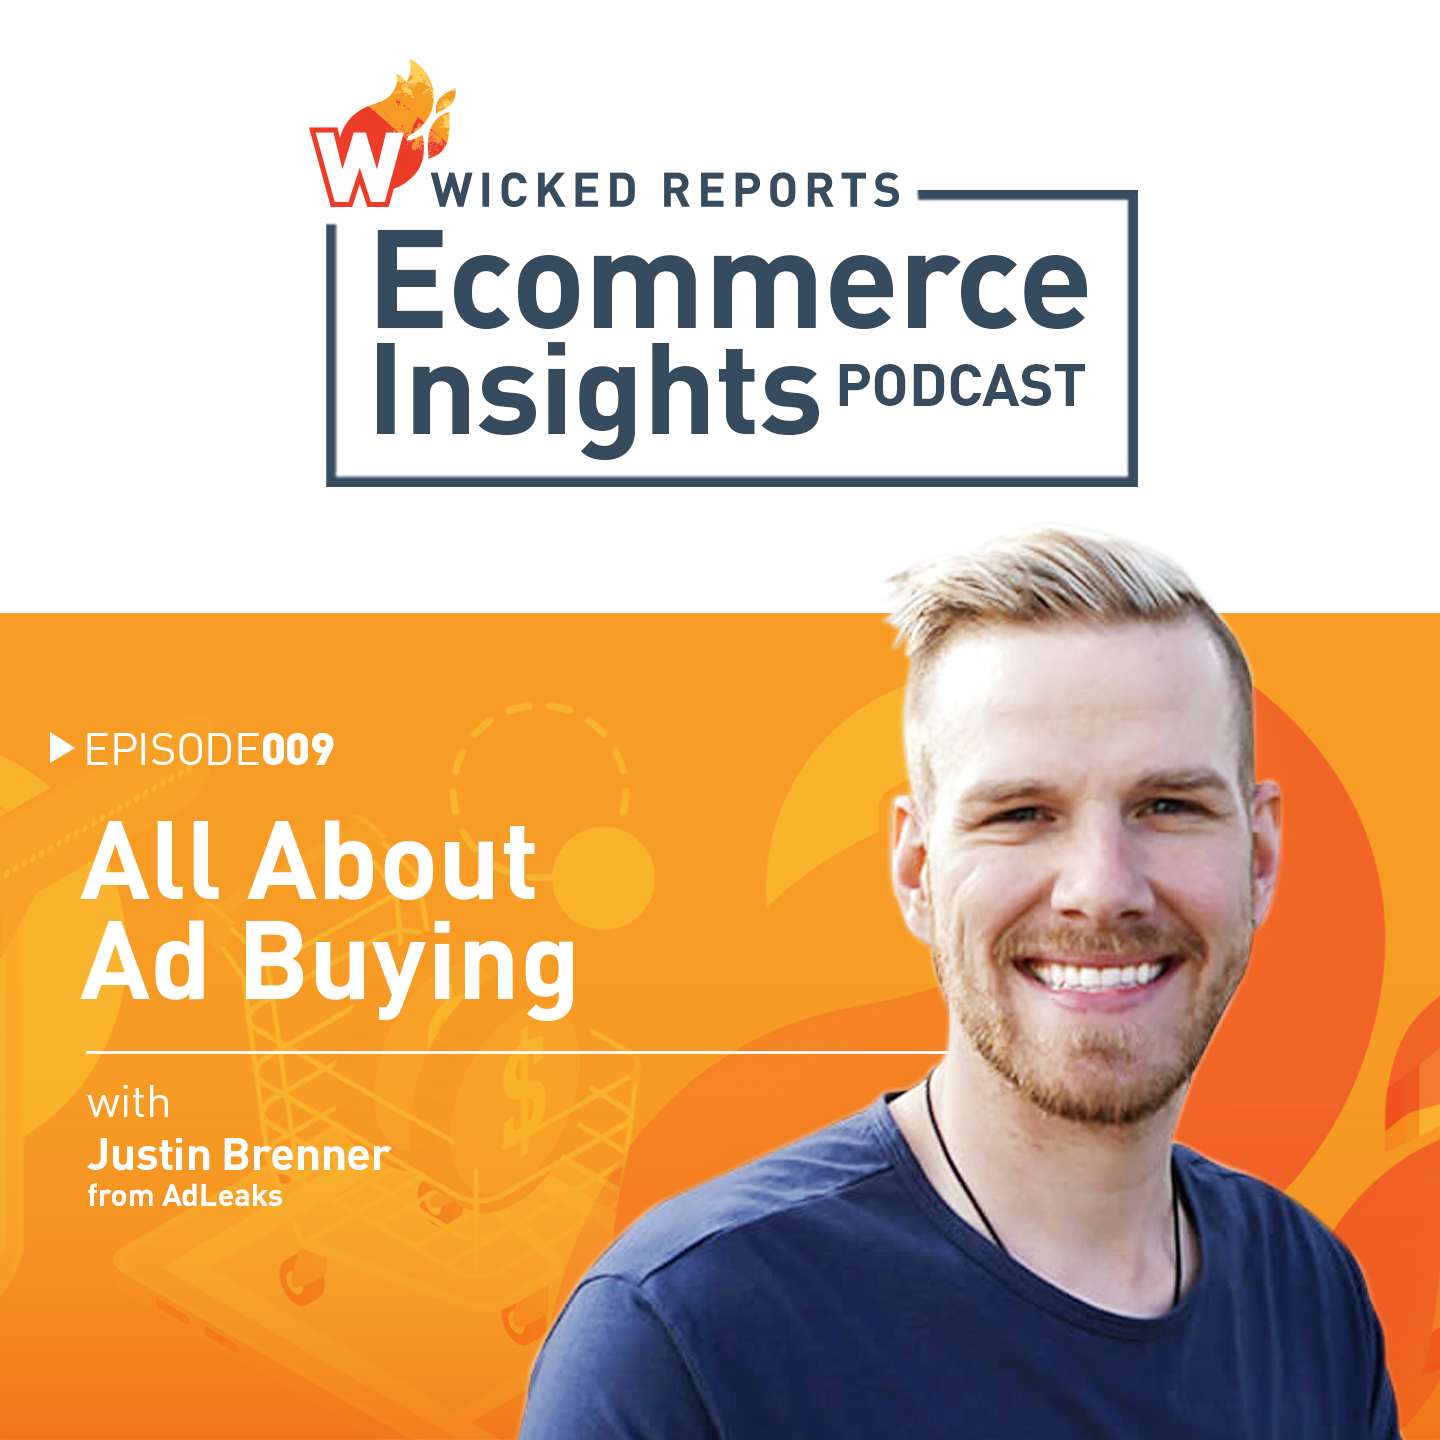 All About Ad Buying with AdLeaks' Justin Brenner